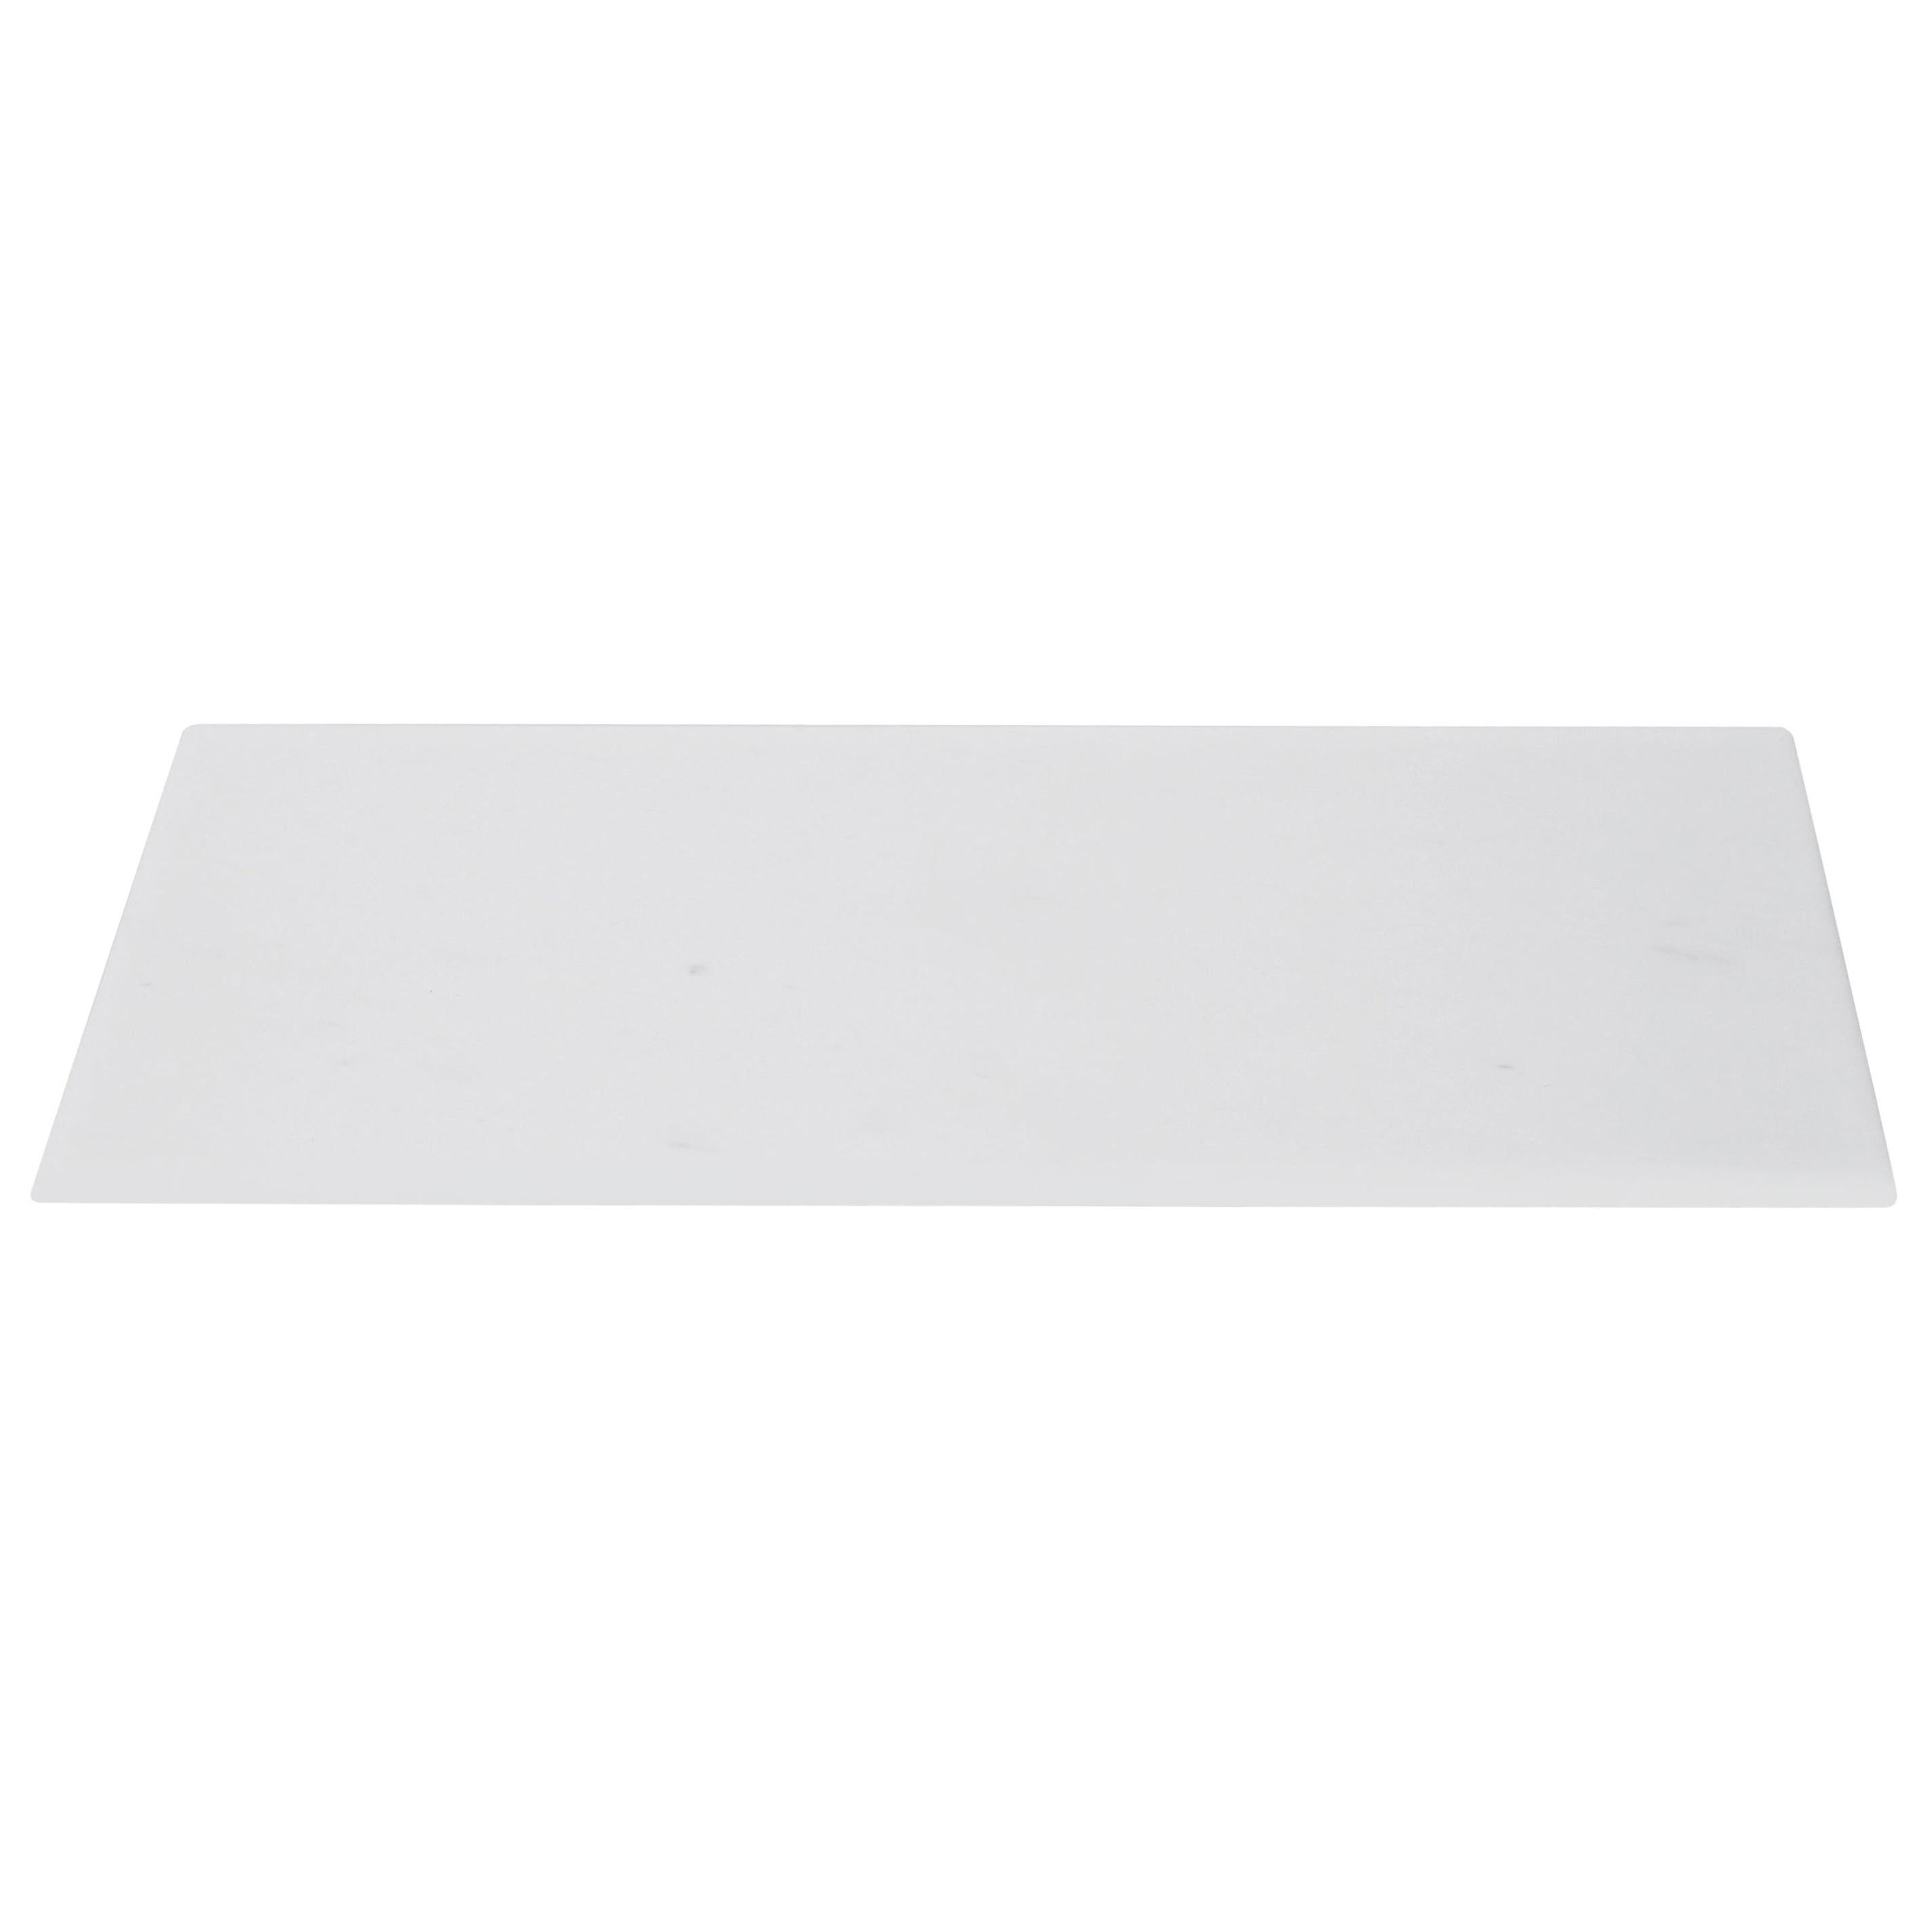 New Modern Sushi Tray in White Michelangelo Marble Creator Ivan Colominas Stock